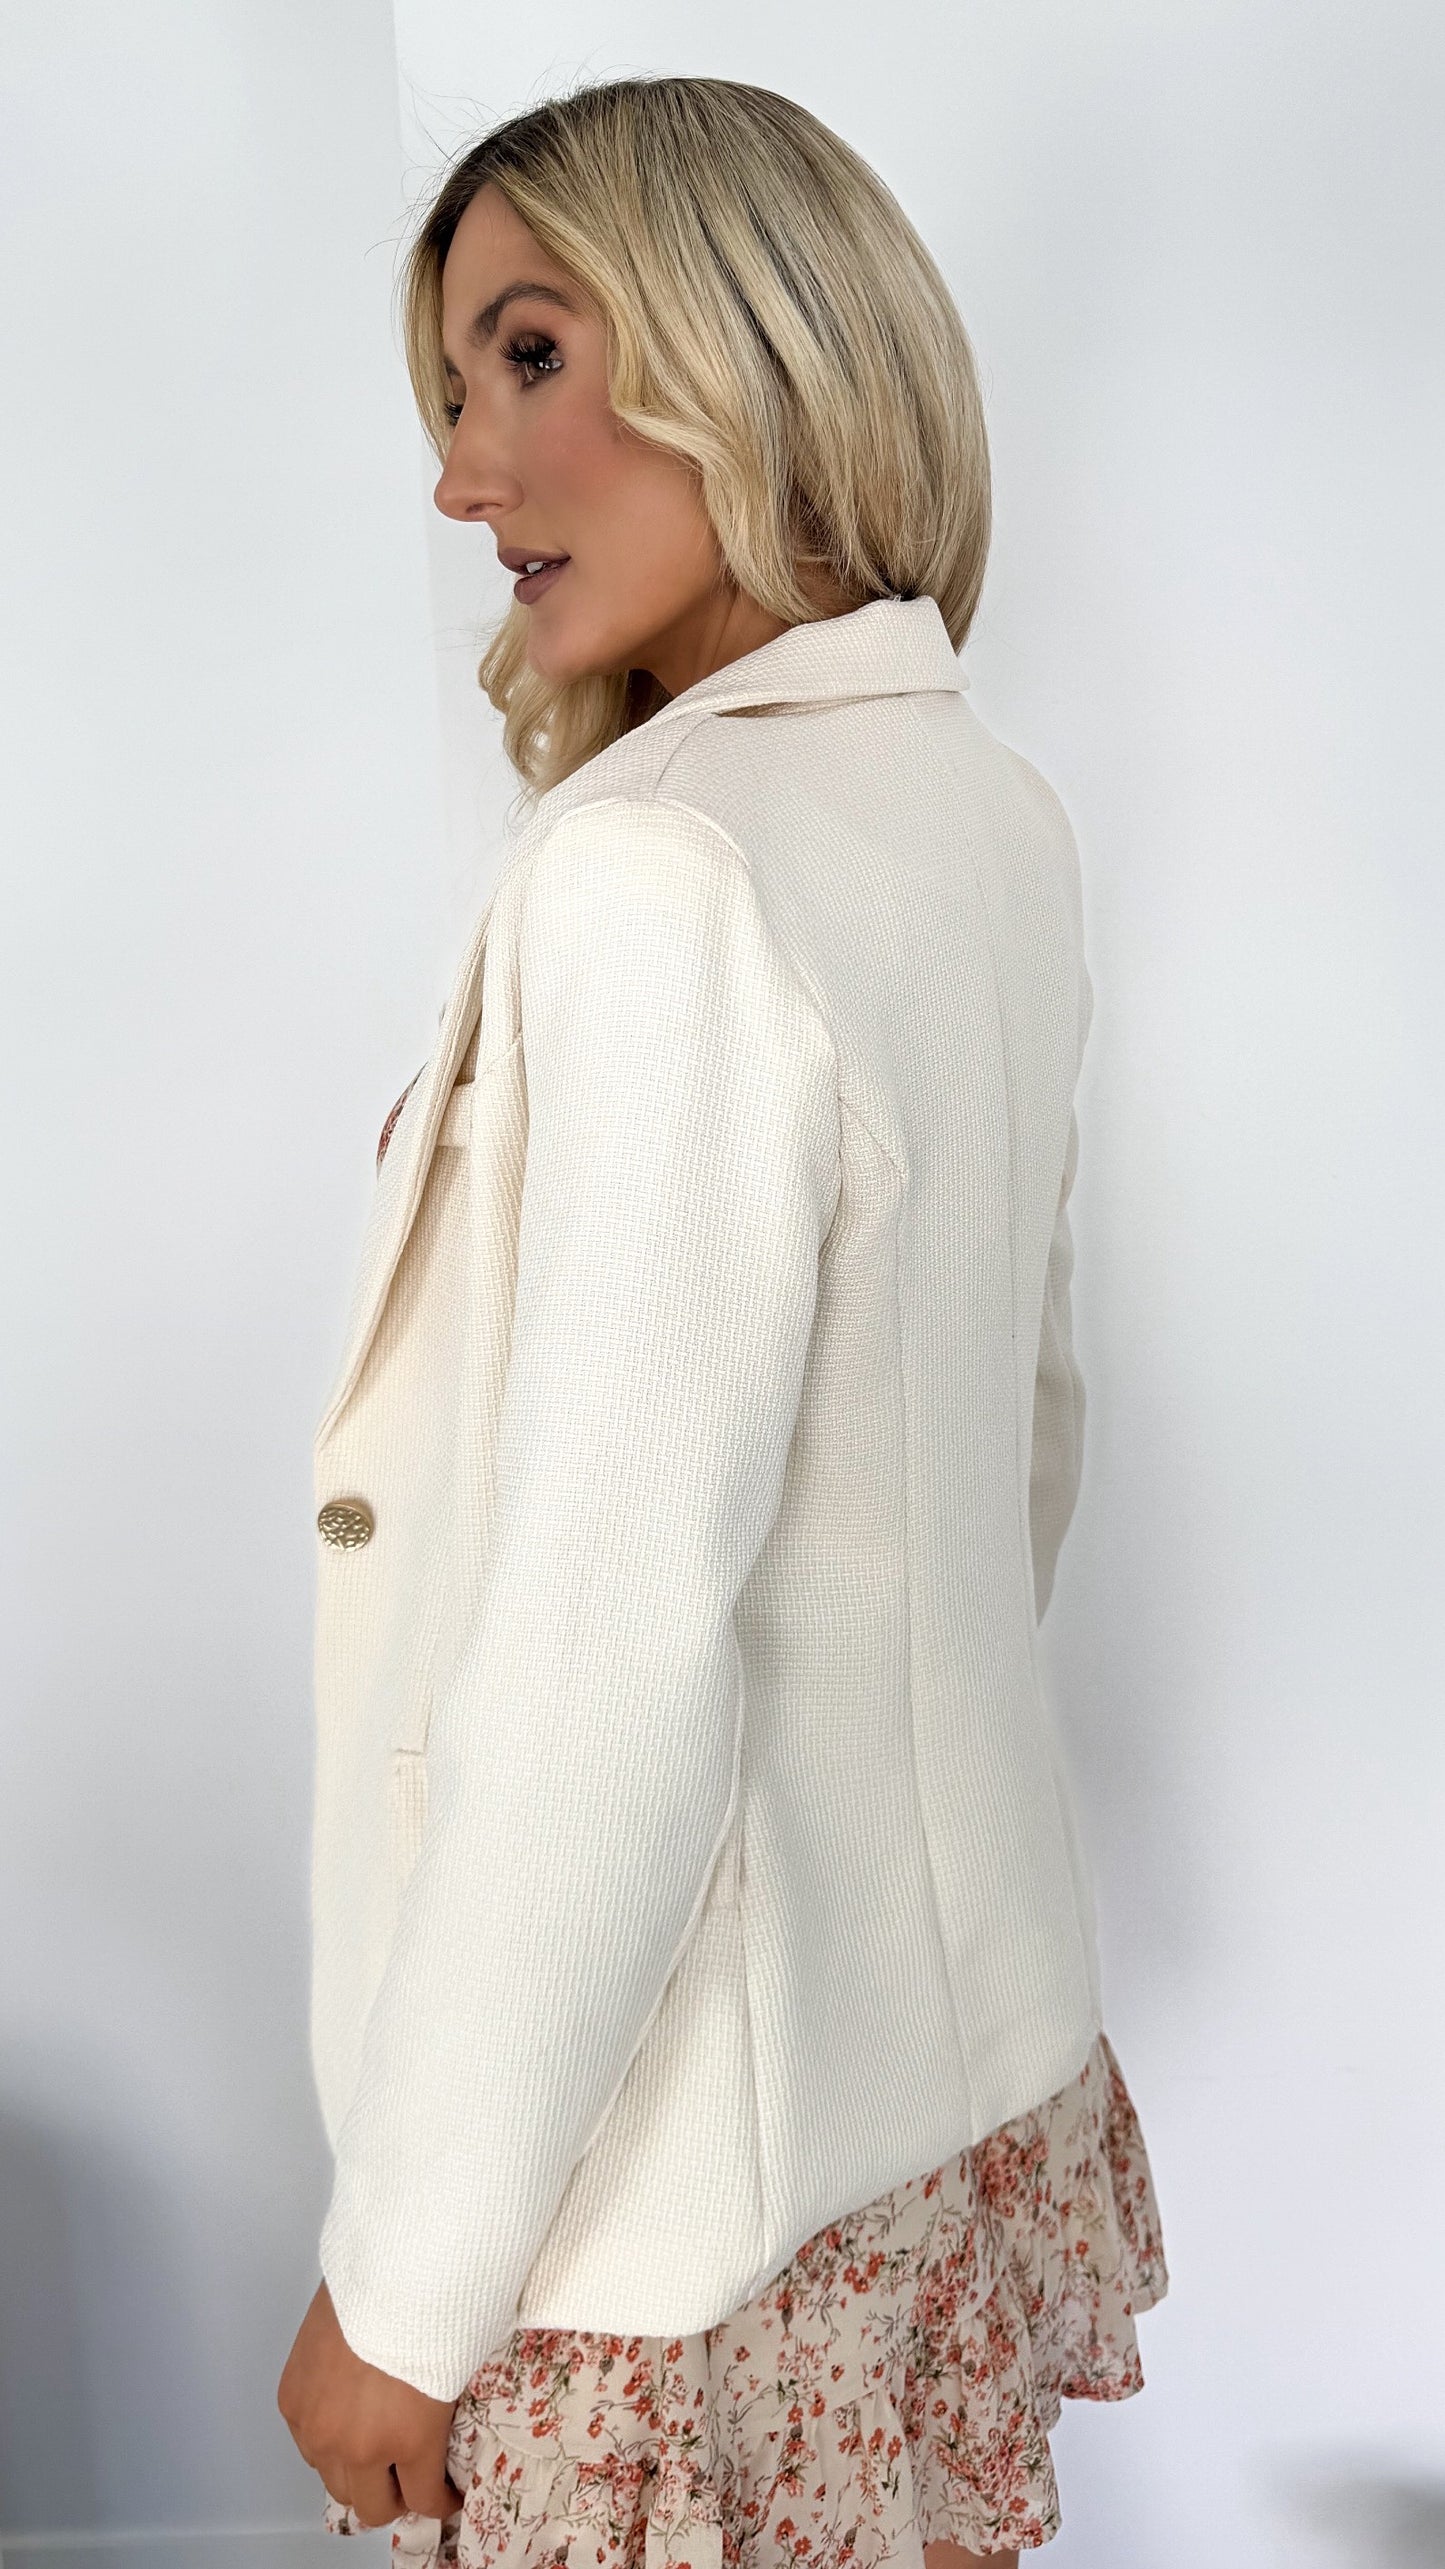 Sonya Single Breasted Blazer with Gold Button - Beige